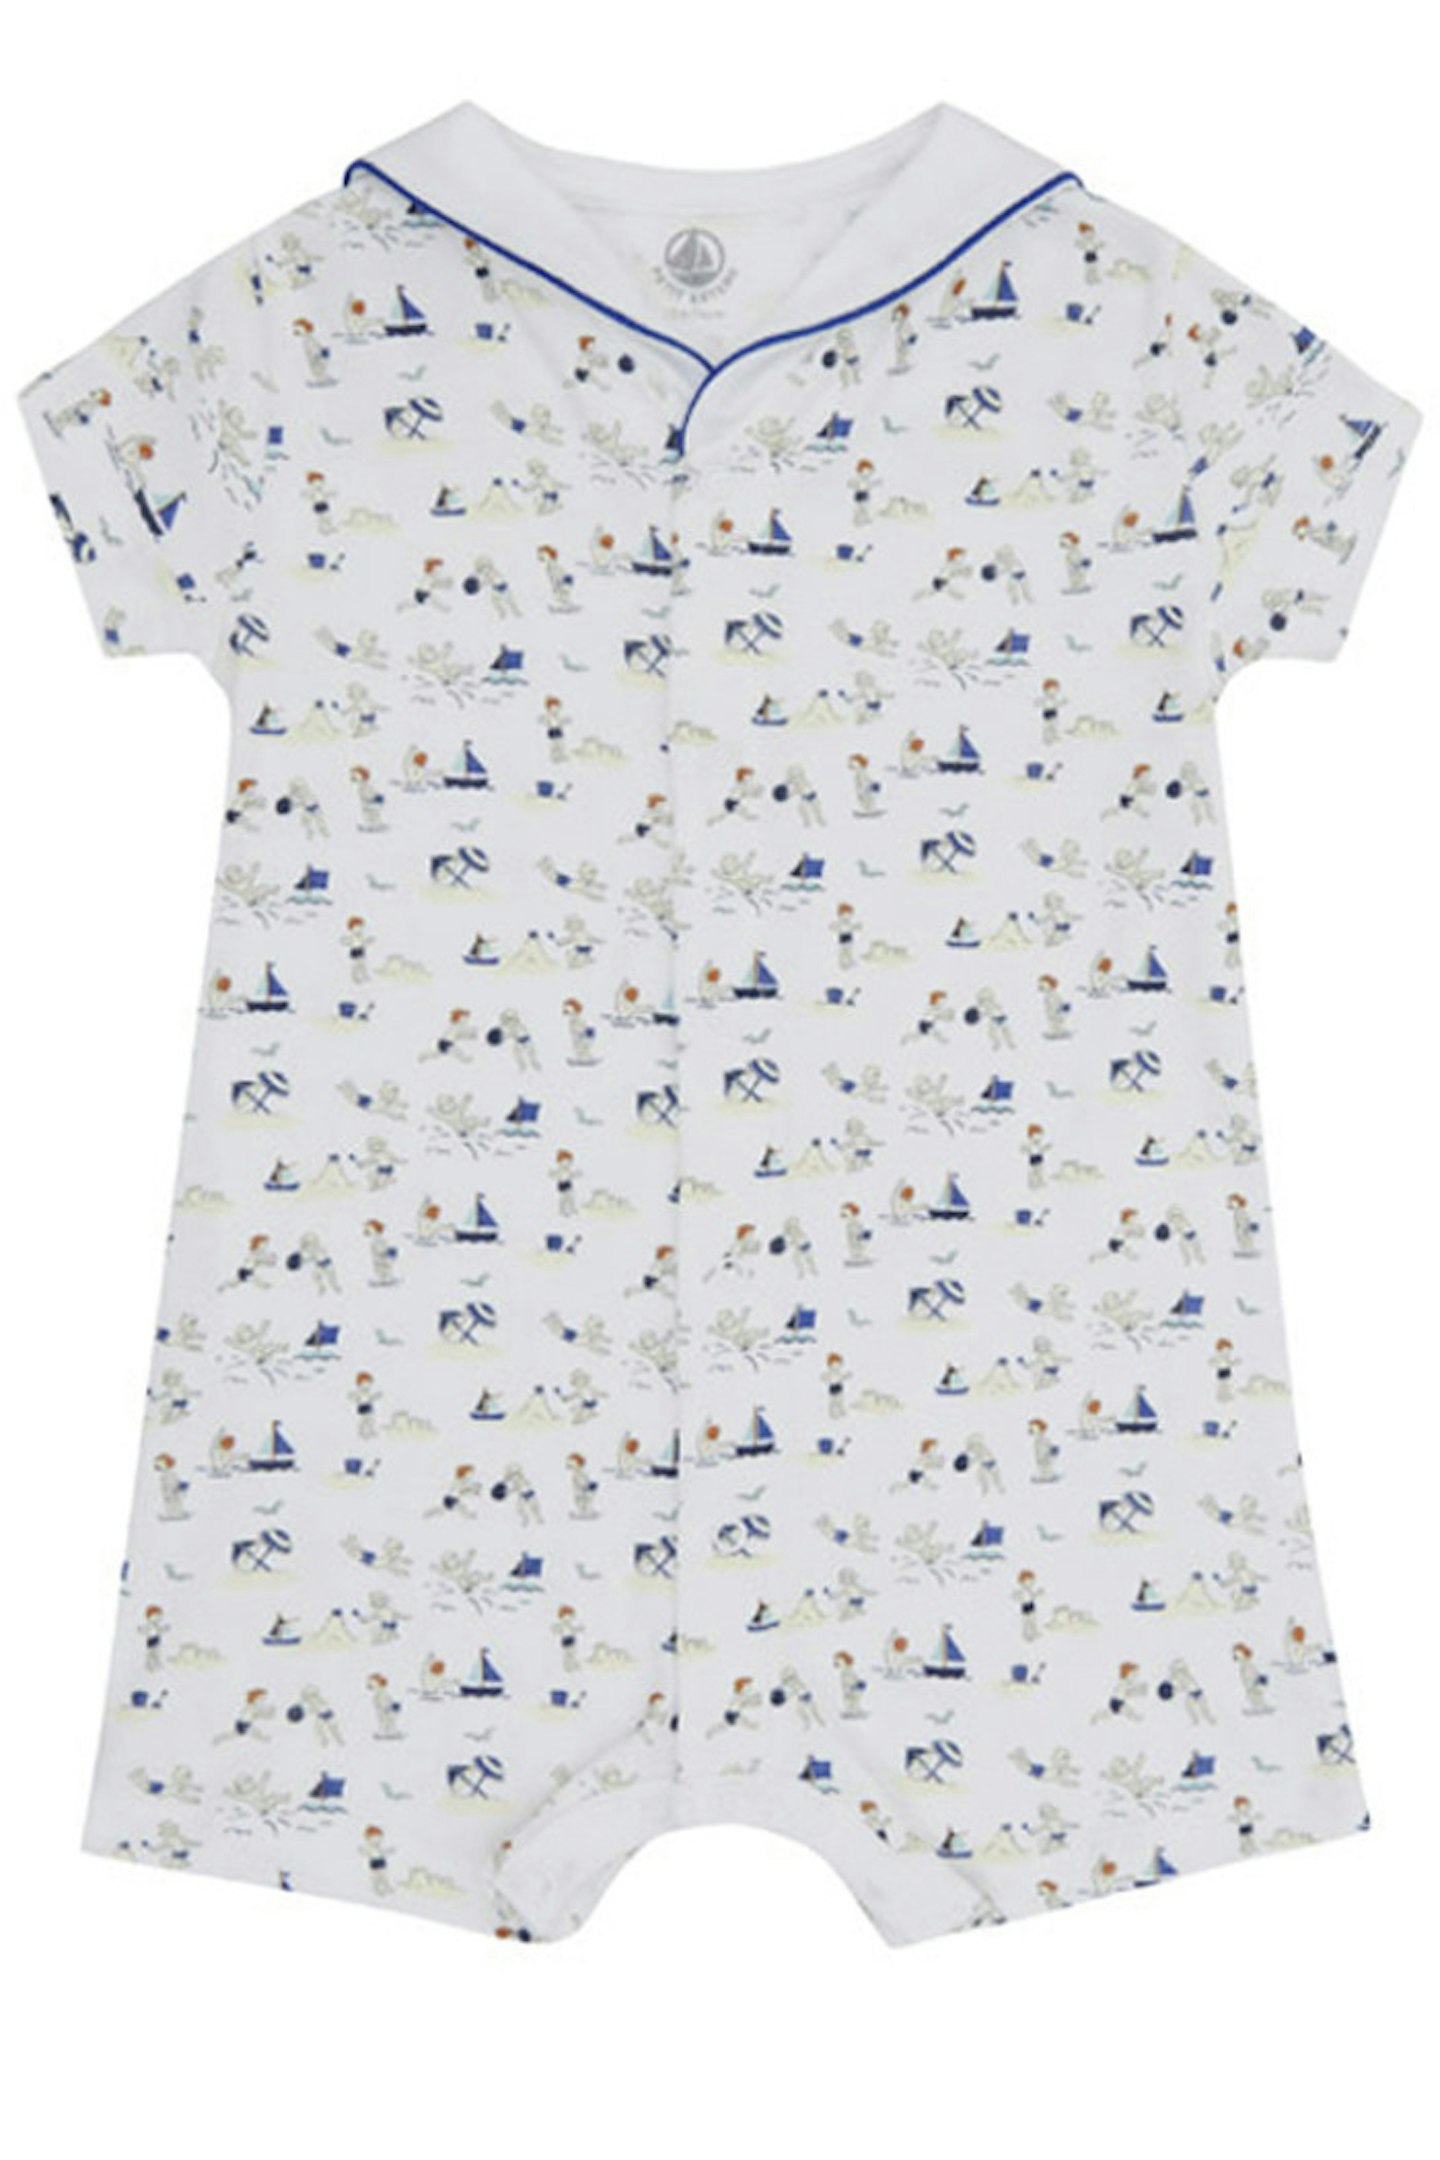 5. White Boat Print All-in-one baby grow, £26.00, www.petit-bateau.co.uk